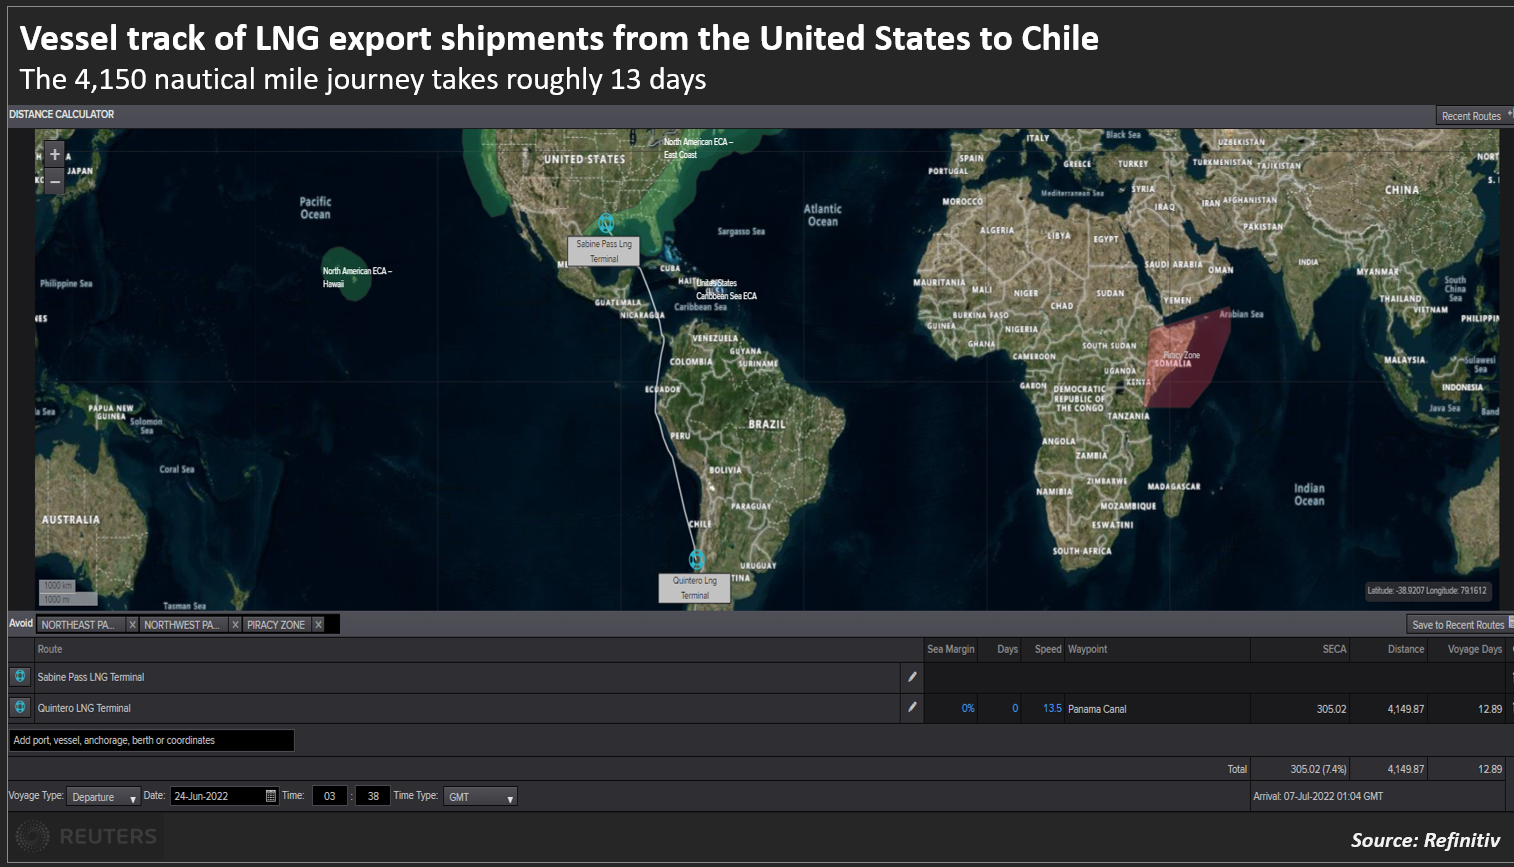 Vessel track of LNG export shipments from the United States to Chile